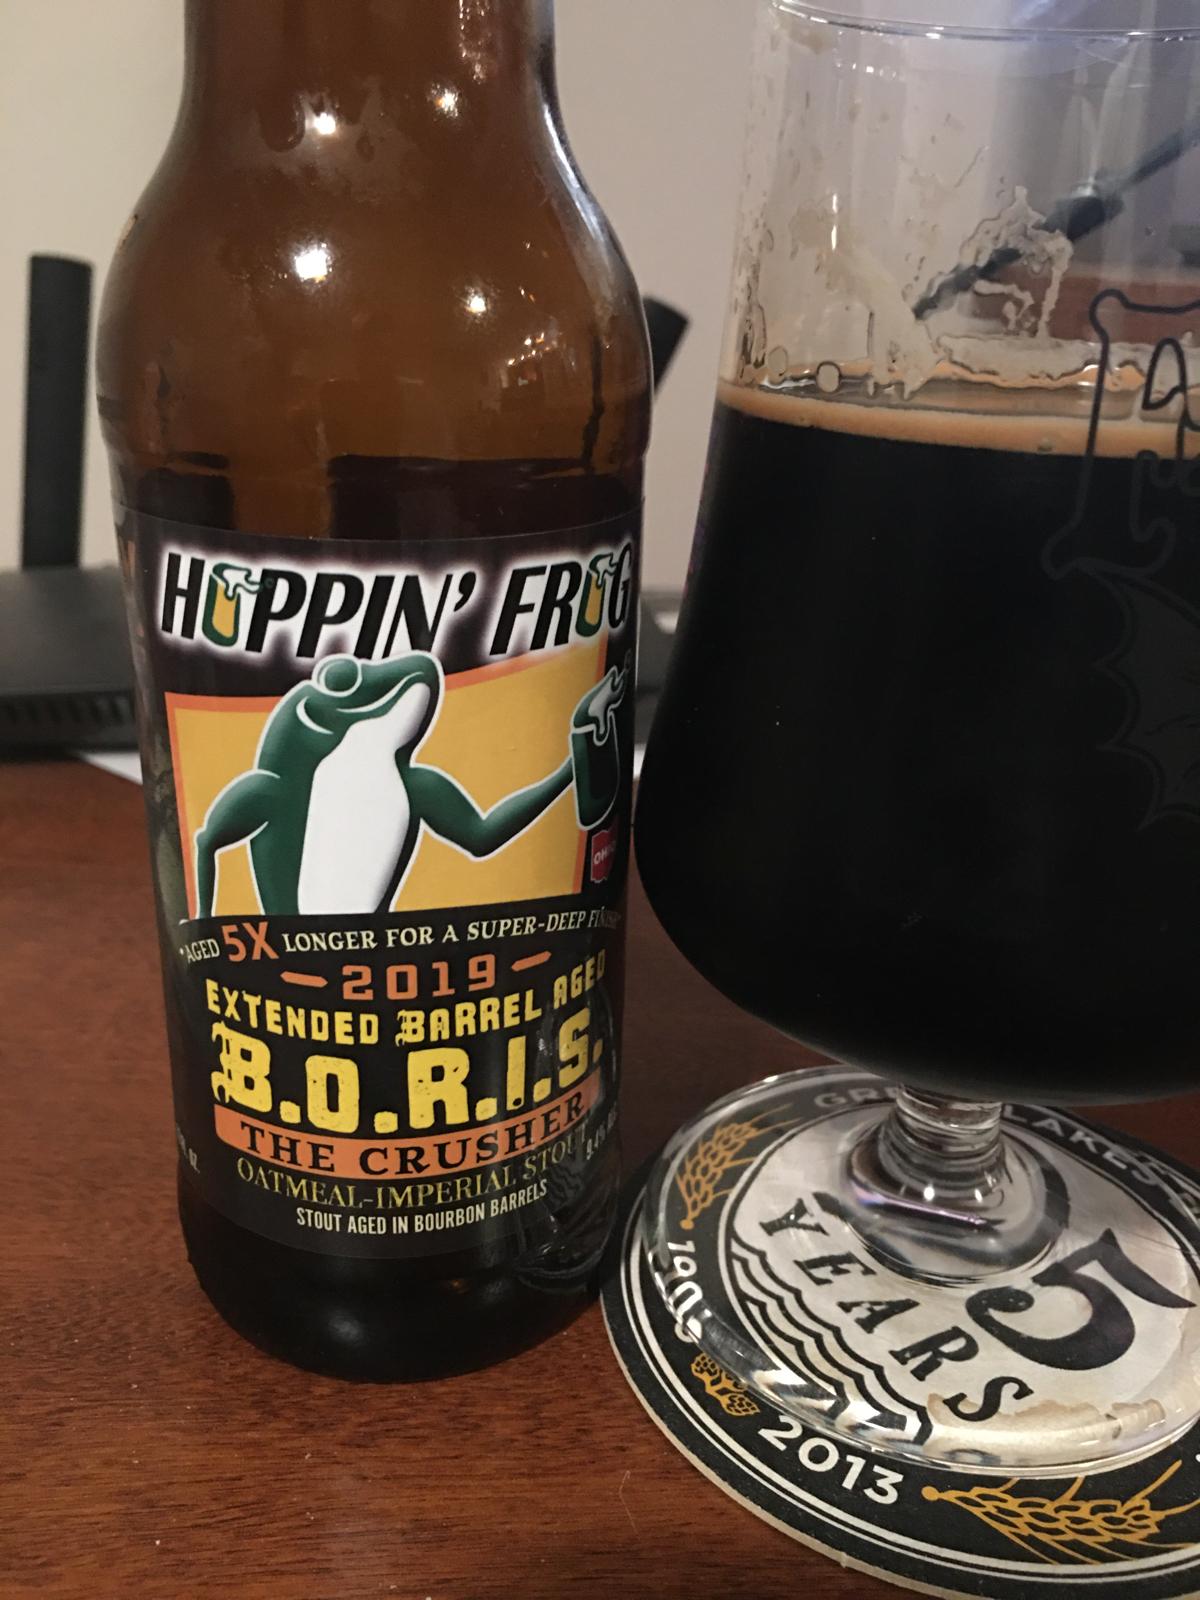 B.O.R.I.S. The Crusher (Extended Barrel Aged)